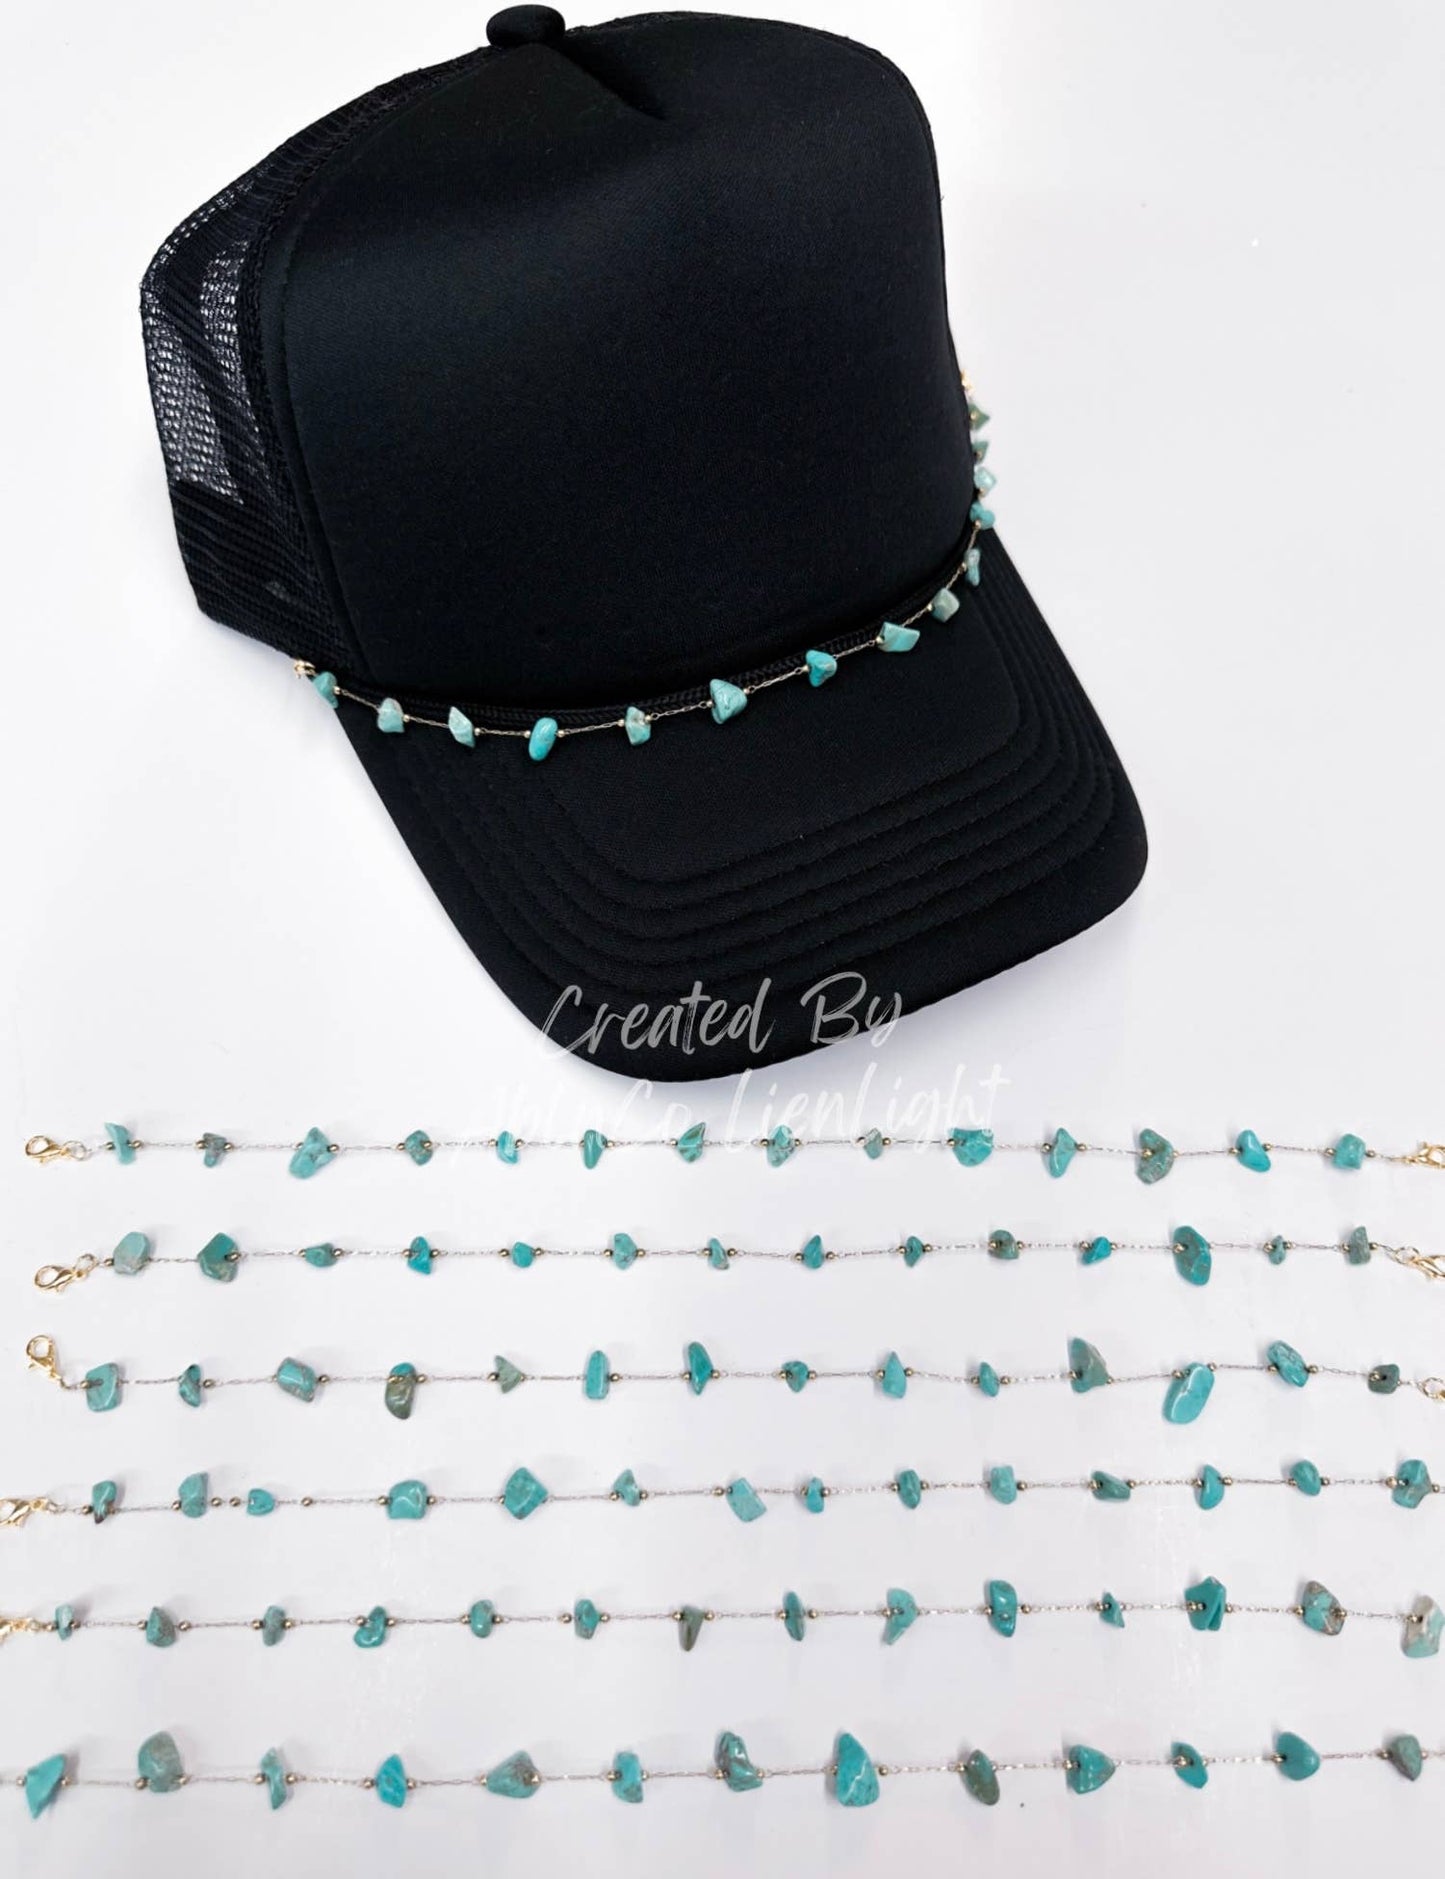 Turquoise Blue Stone Trucker hat chains, Chains for hats: Turquoise stone